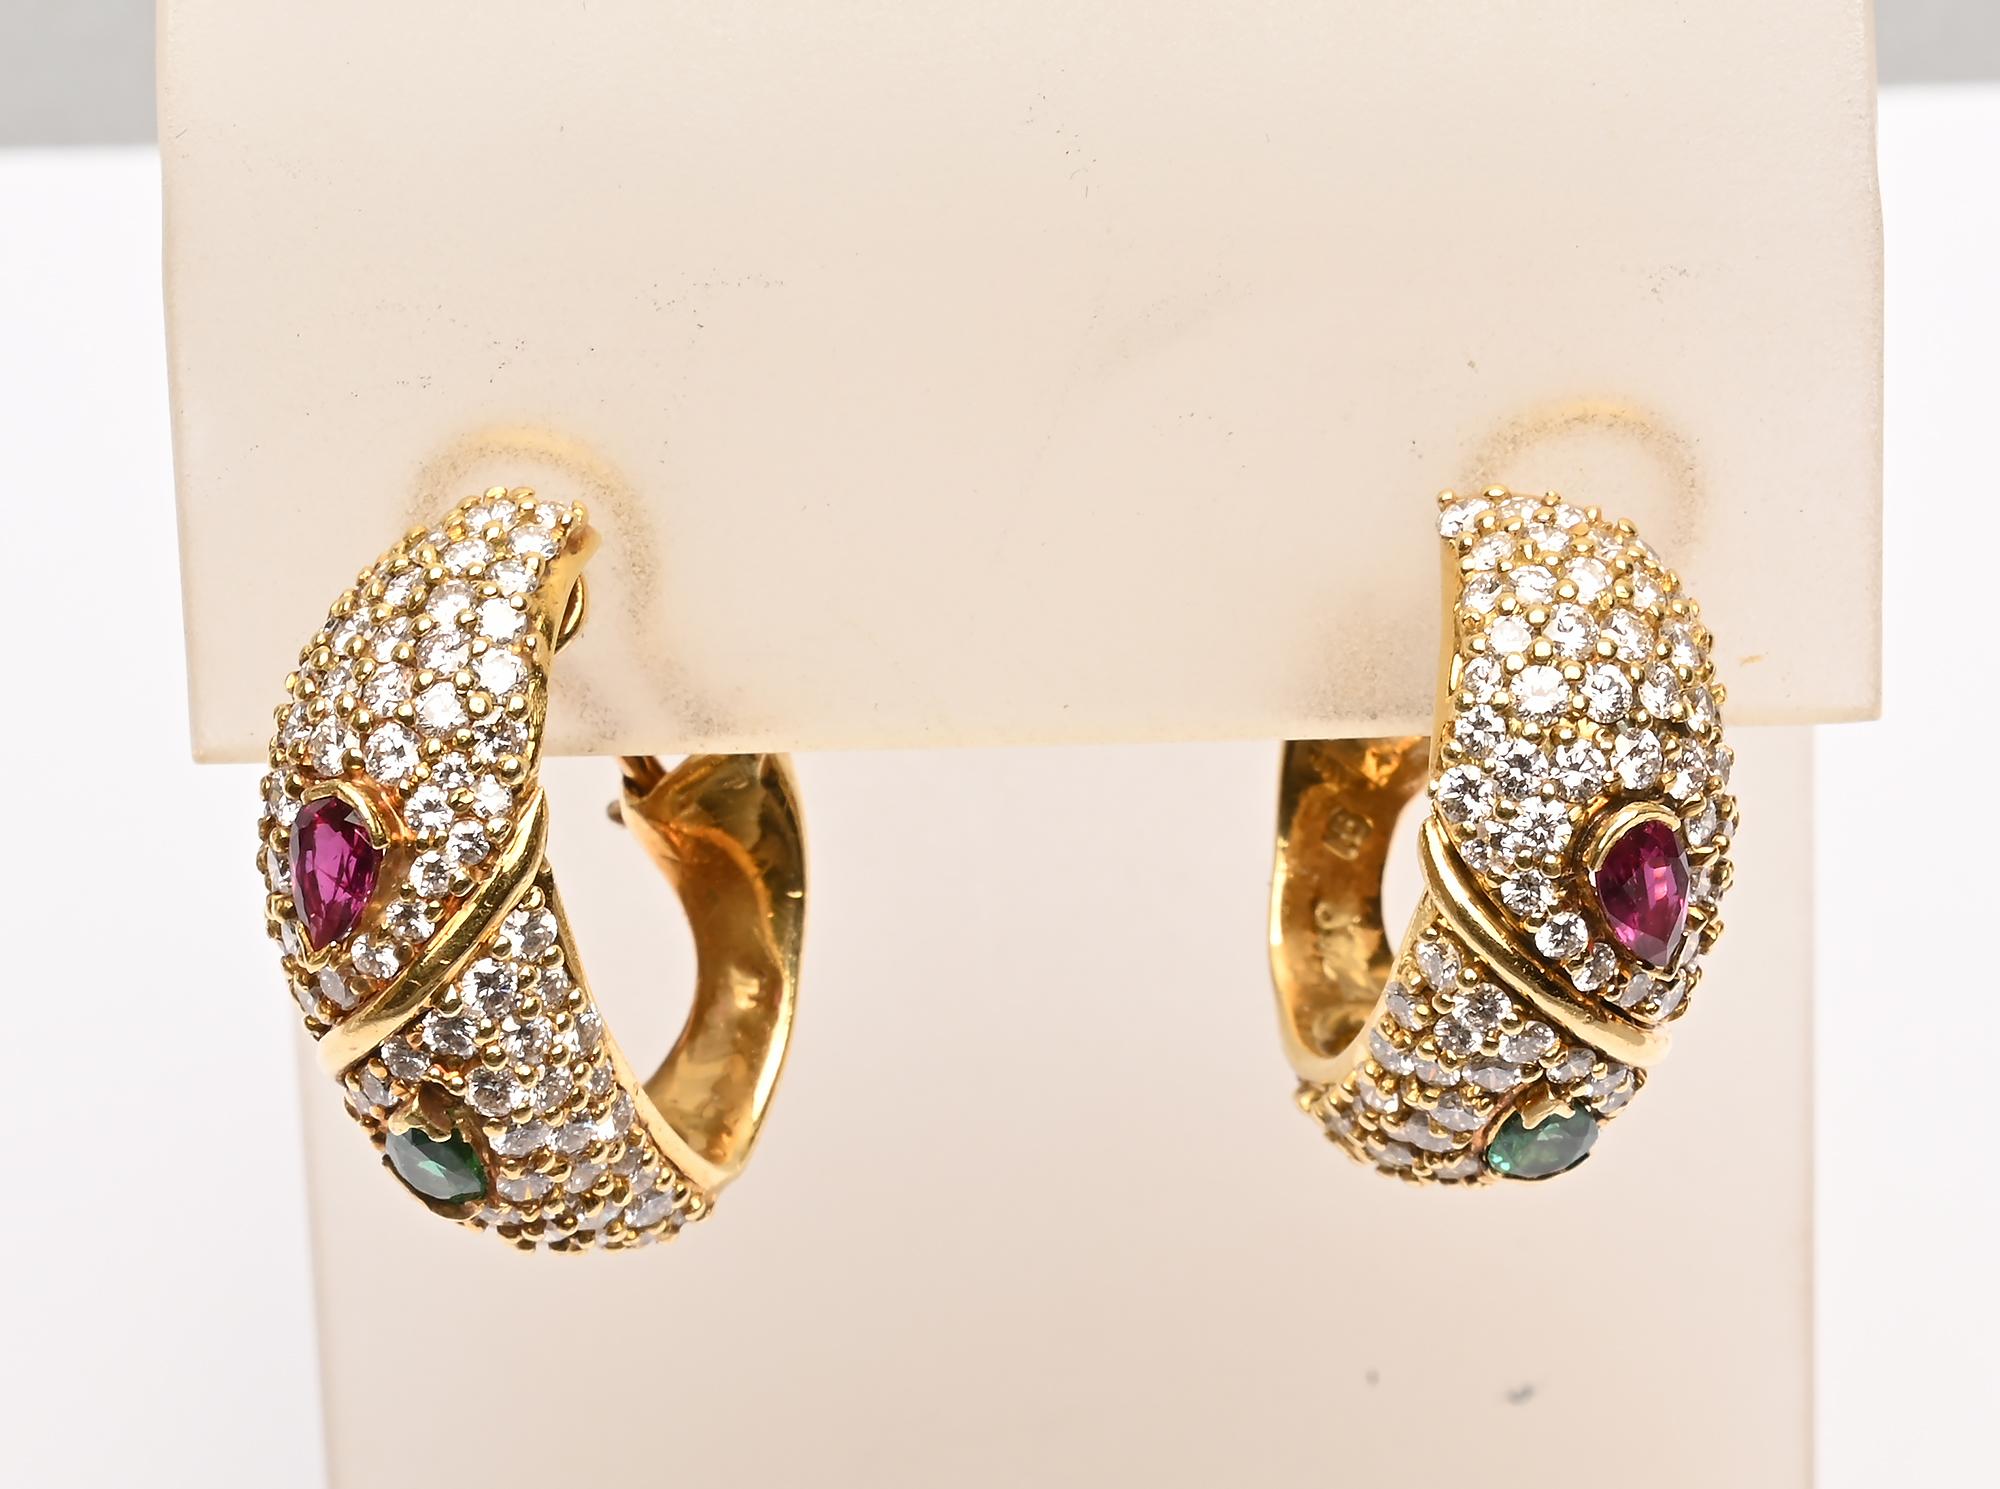 Contemporary Hammerman Brothers Diamond Hoop Earrings with Rubies and Emeralds